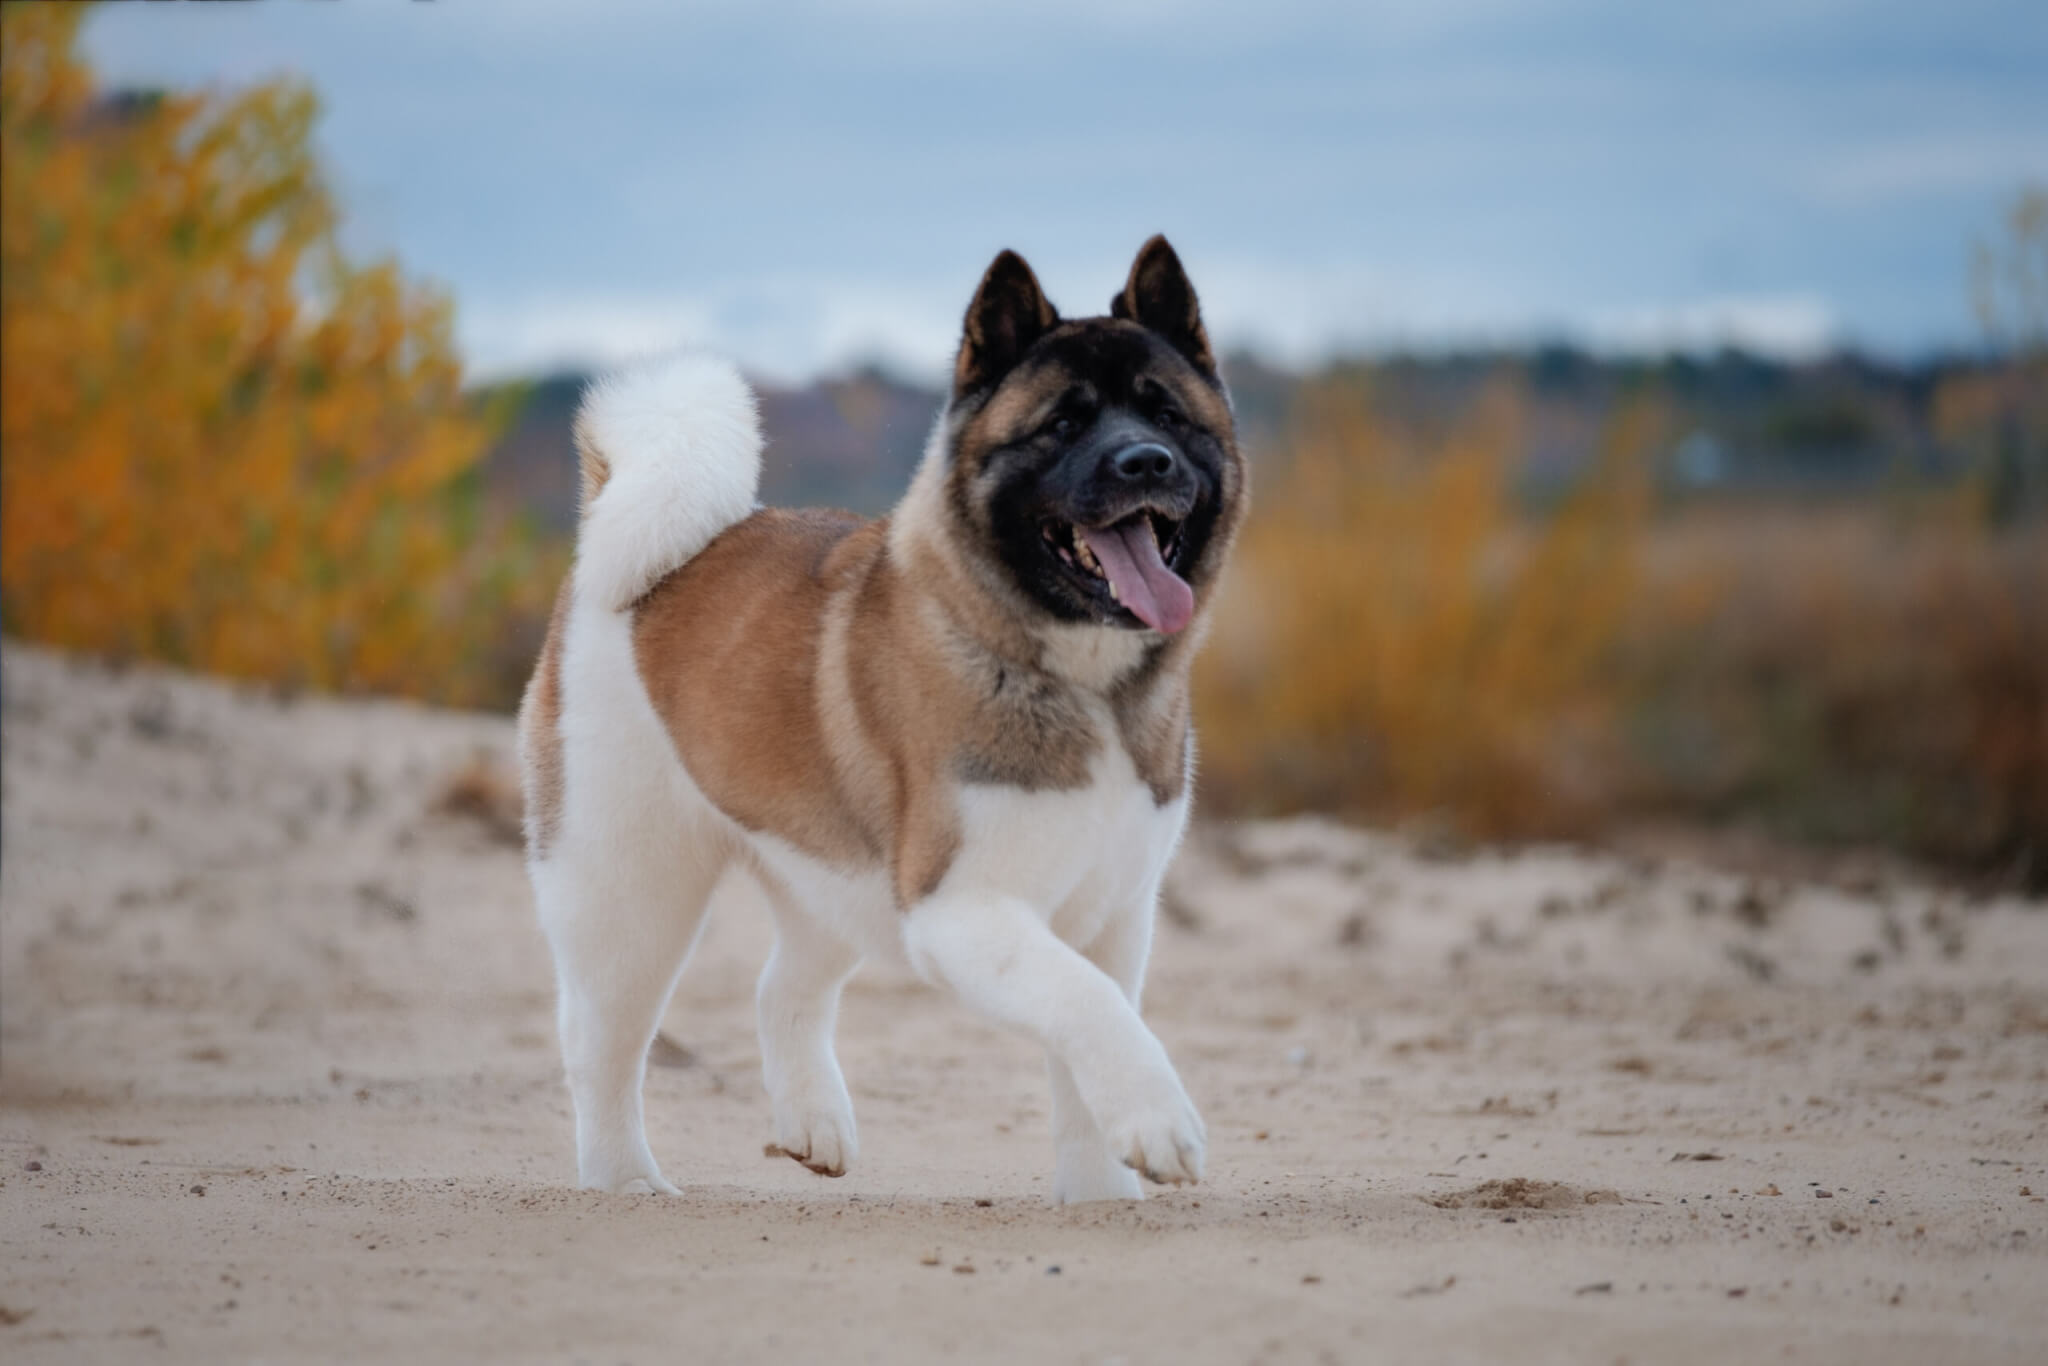 American Akita dog out for a walk